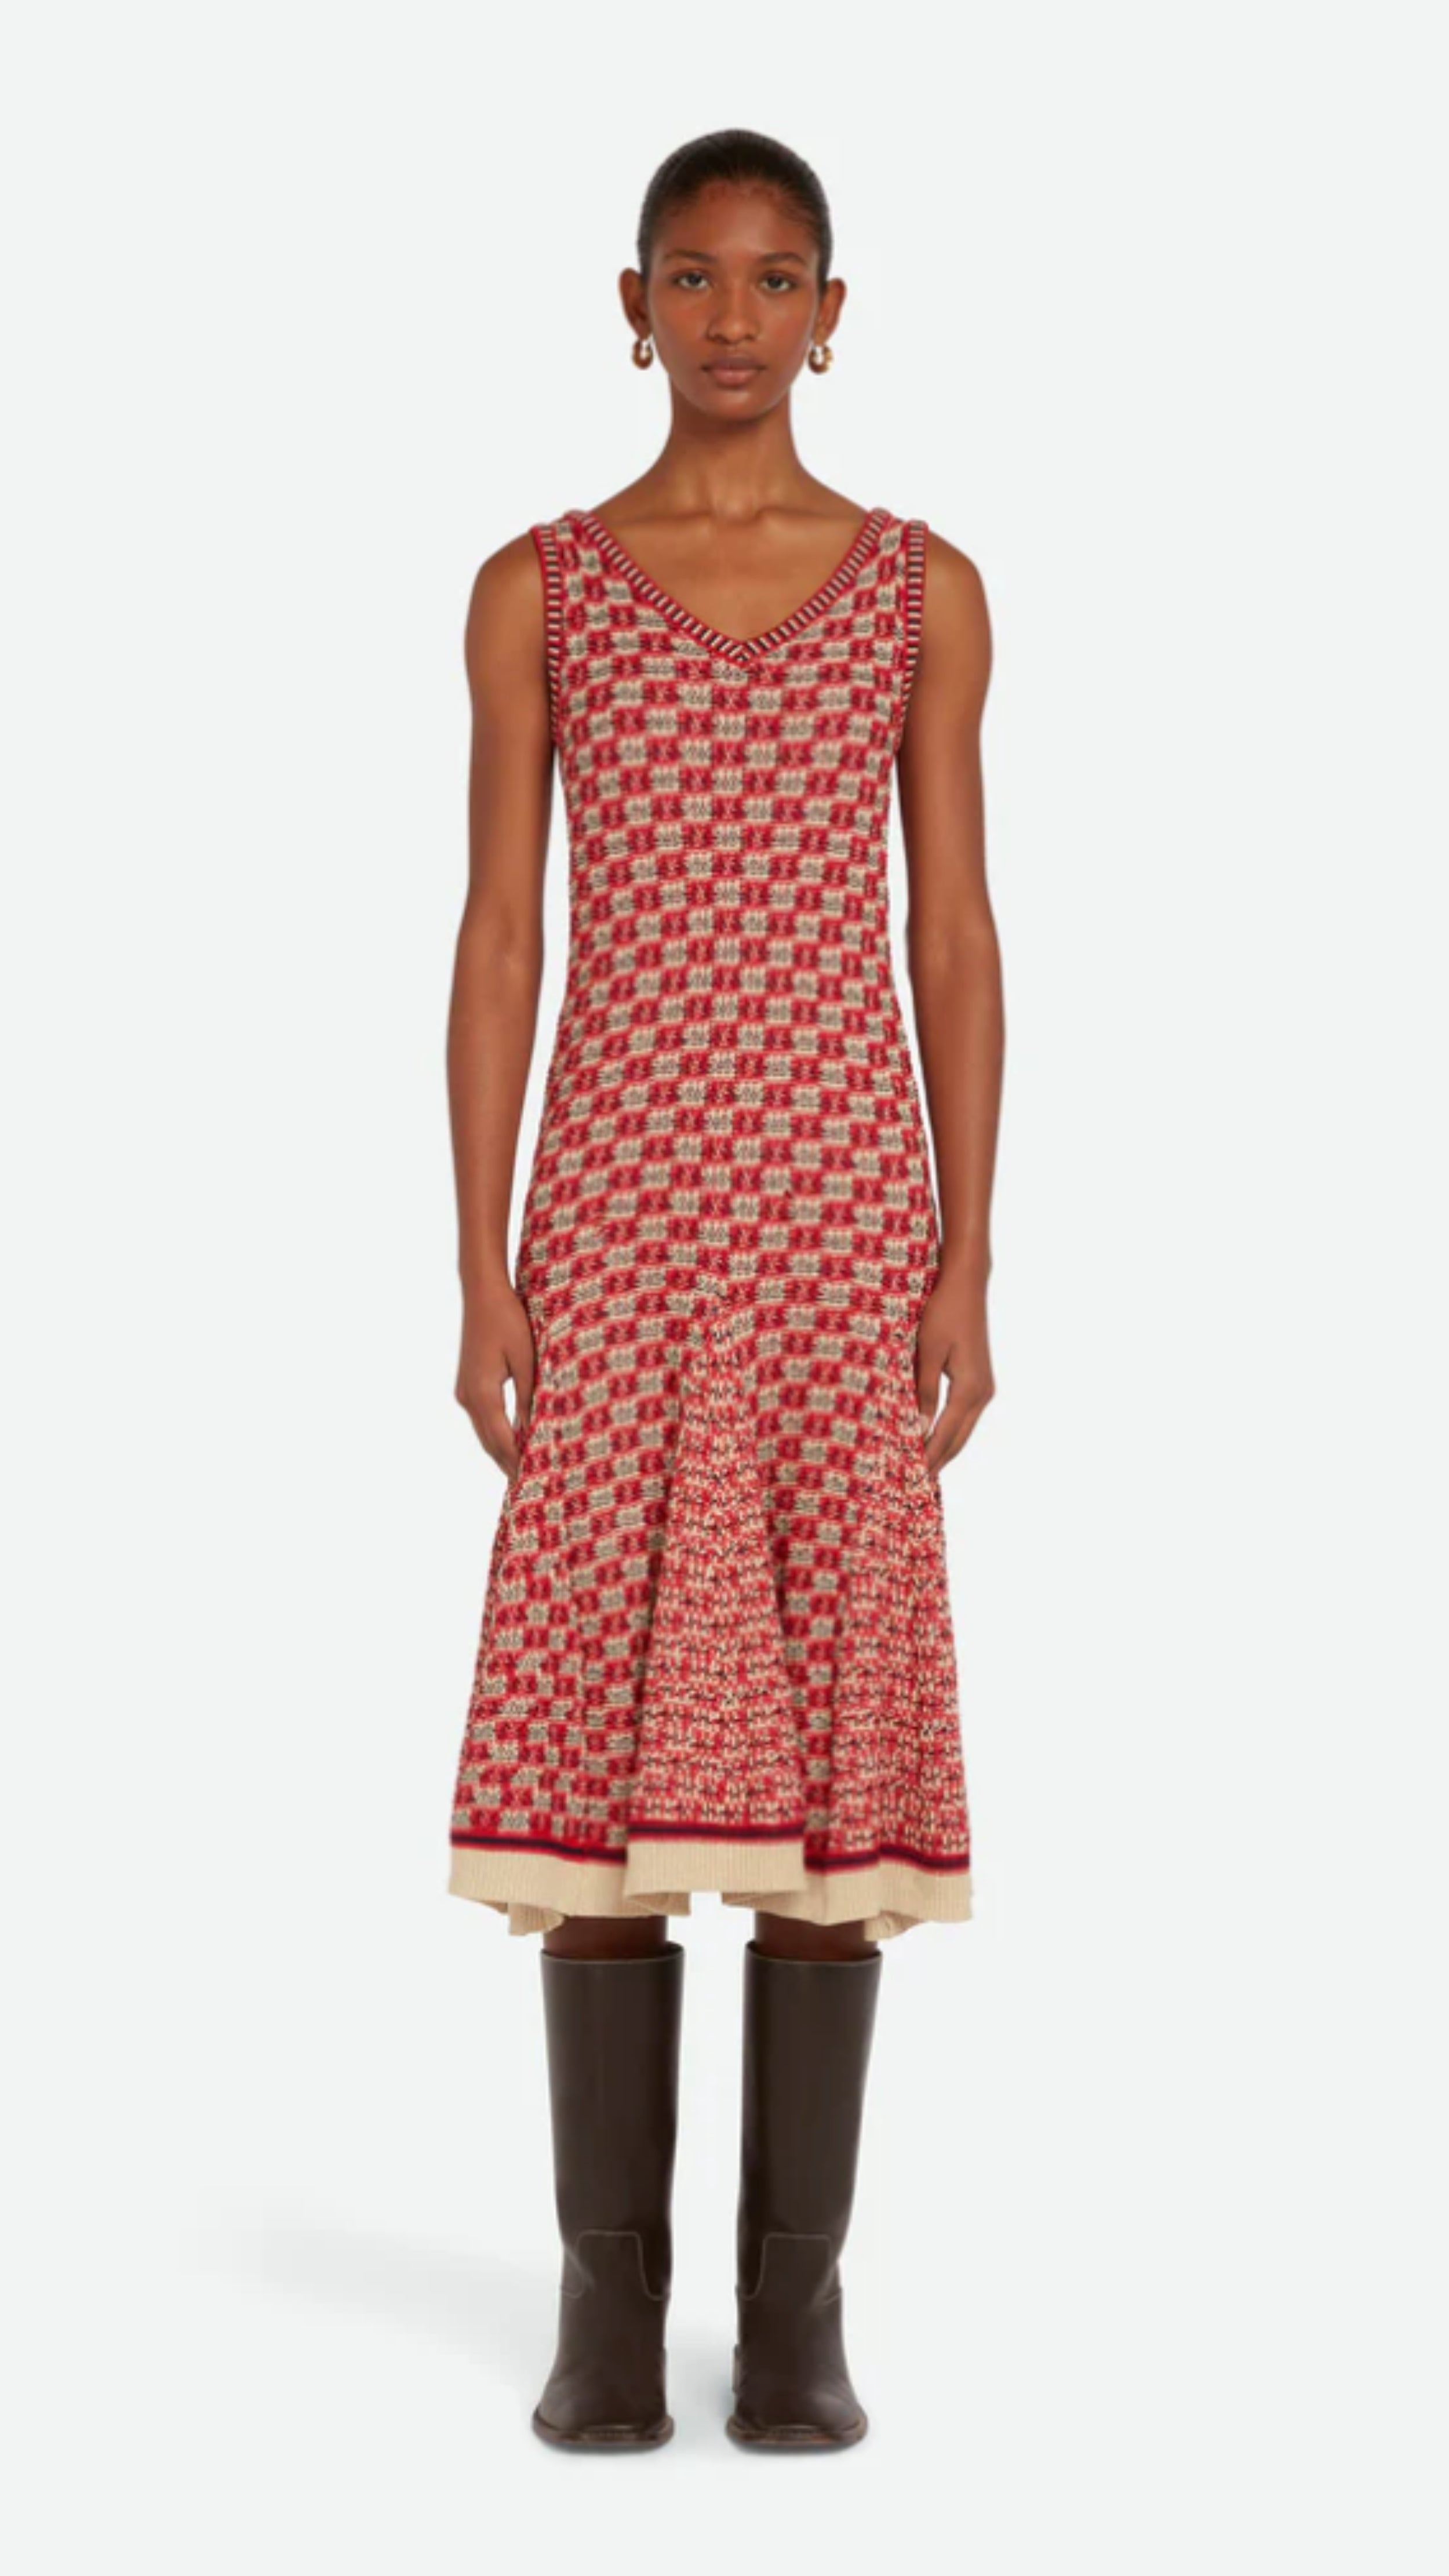 Wales Bonner Soar Godet Dress Woven in an light weight summer Italian cotton knit. This midi length dress has a checkered pattern in red, ivory and black. It has a v-neckline and slightly flared skirt that falls just below the knee. Shown on model facing front.